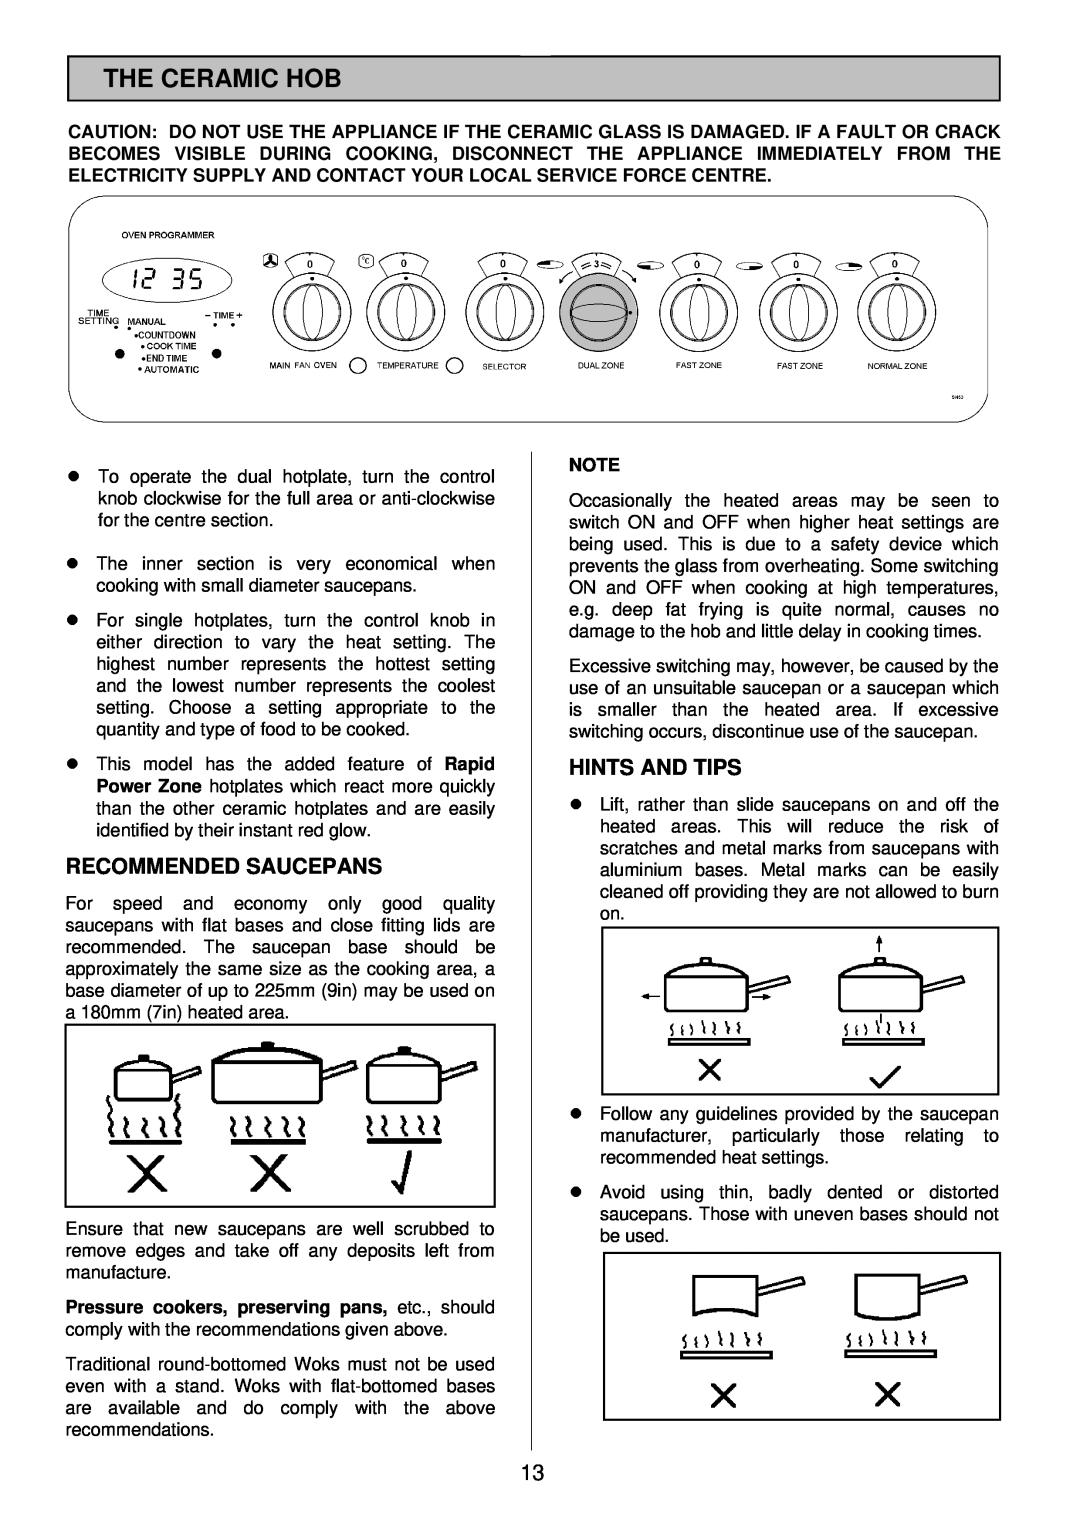 Tricity Bendix SI 453 installation instructions The Ceramic Hob, Recommended Saucepans, Hints And Tips 